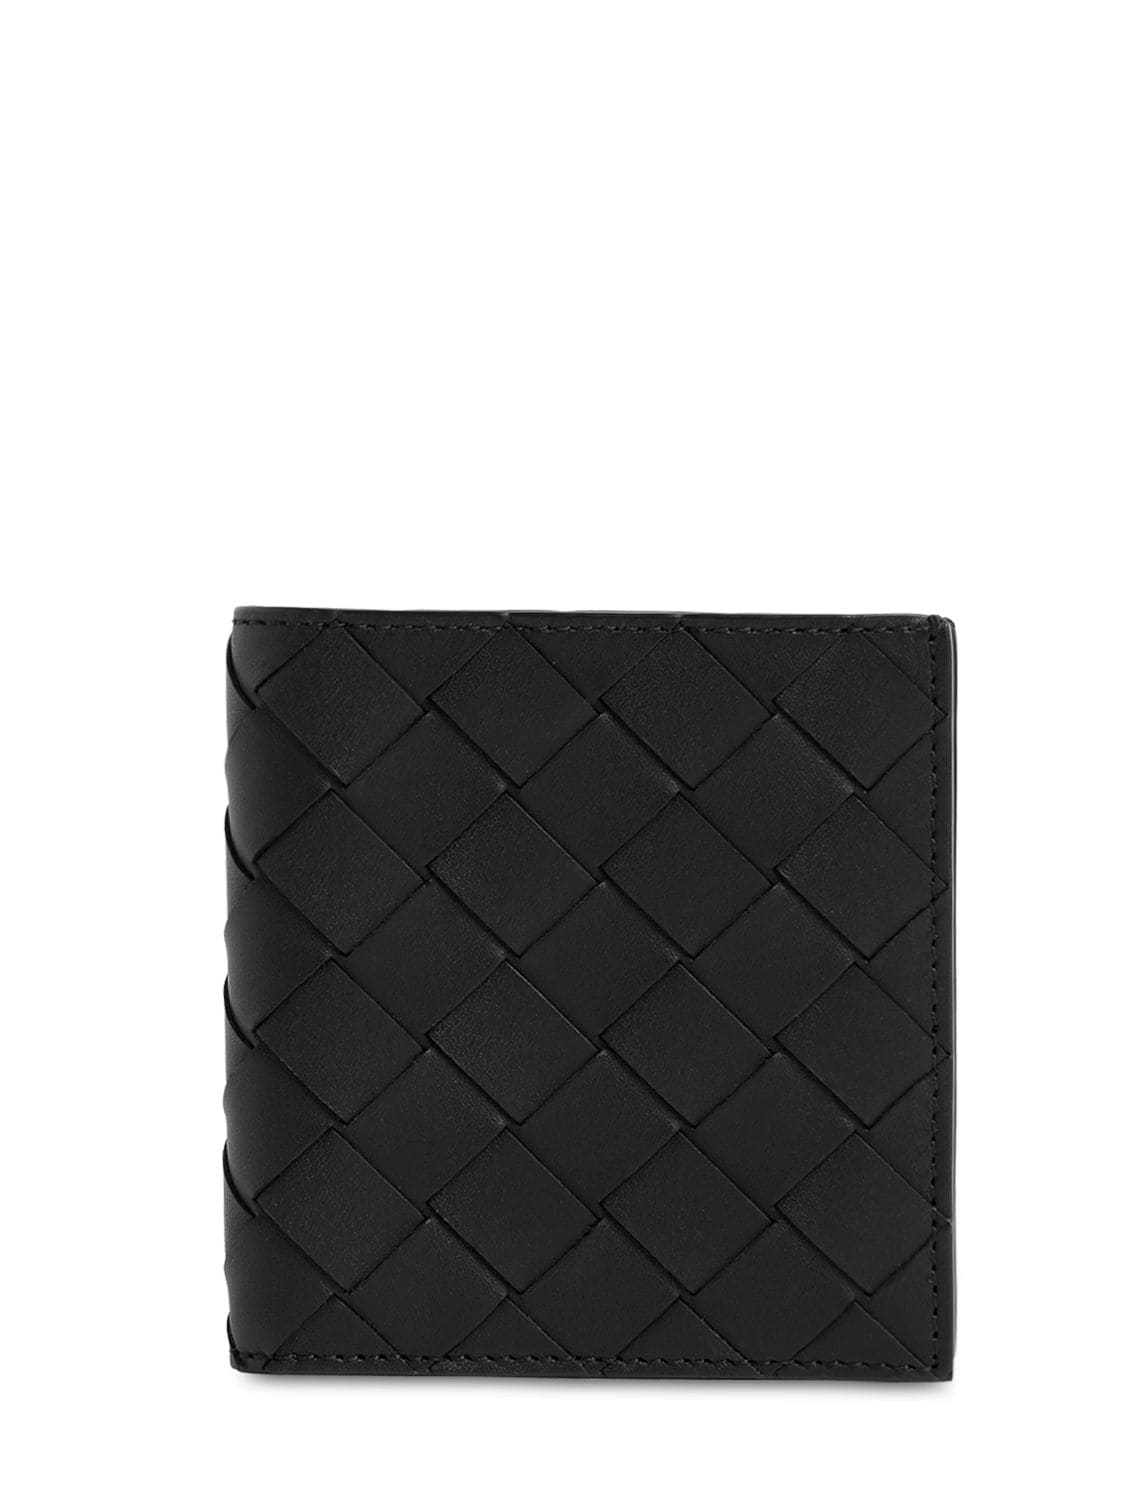 Image of Intrecciato Leather Card Holder Wallet